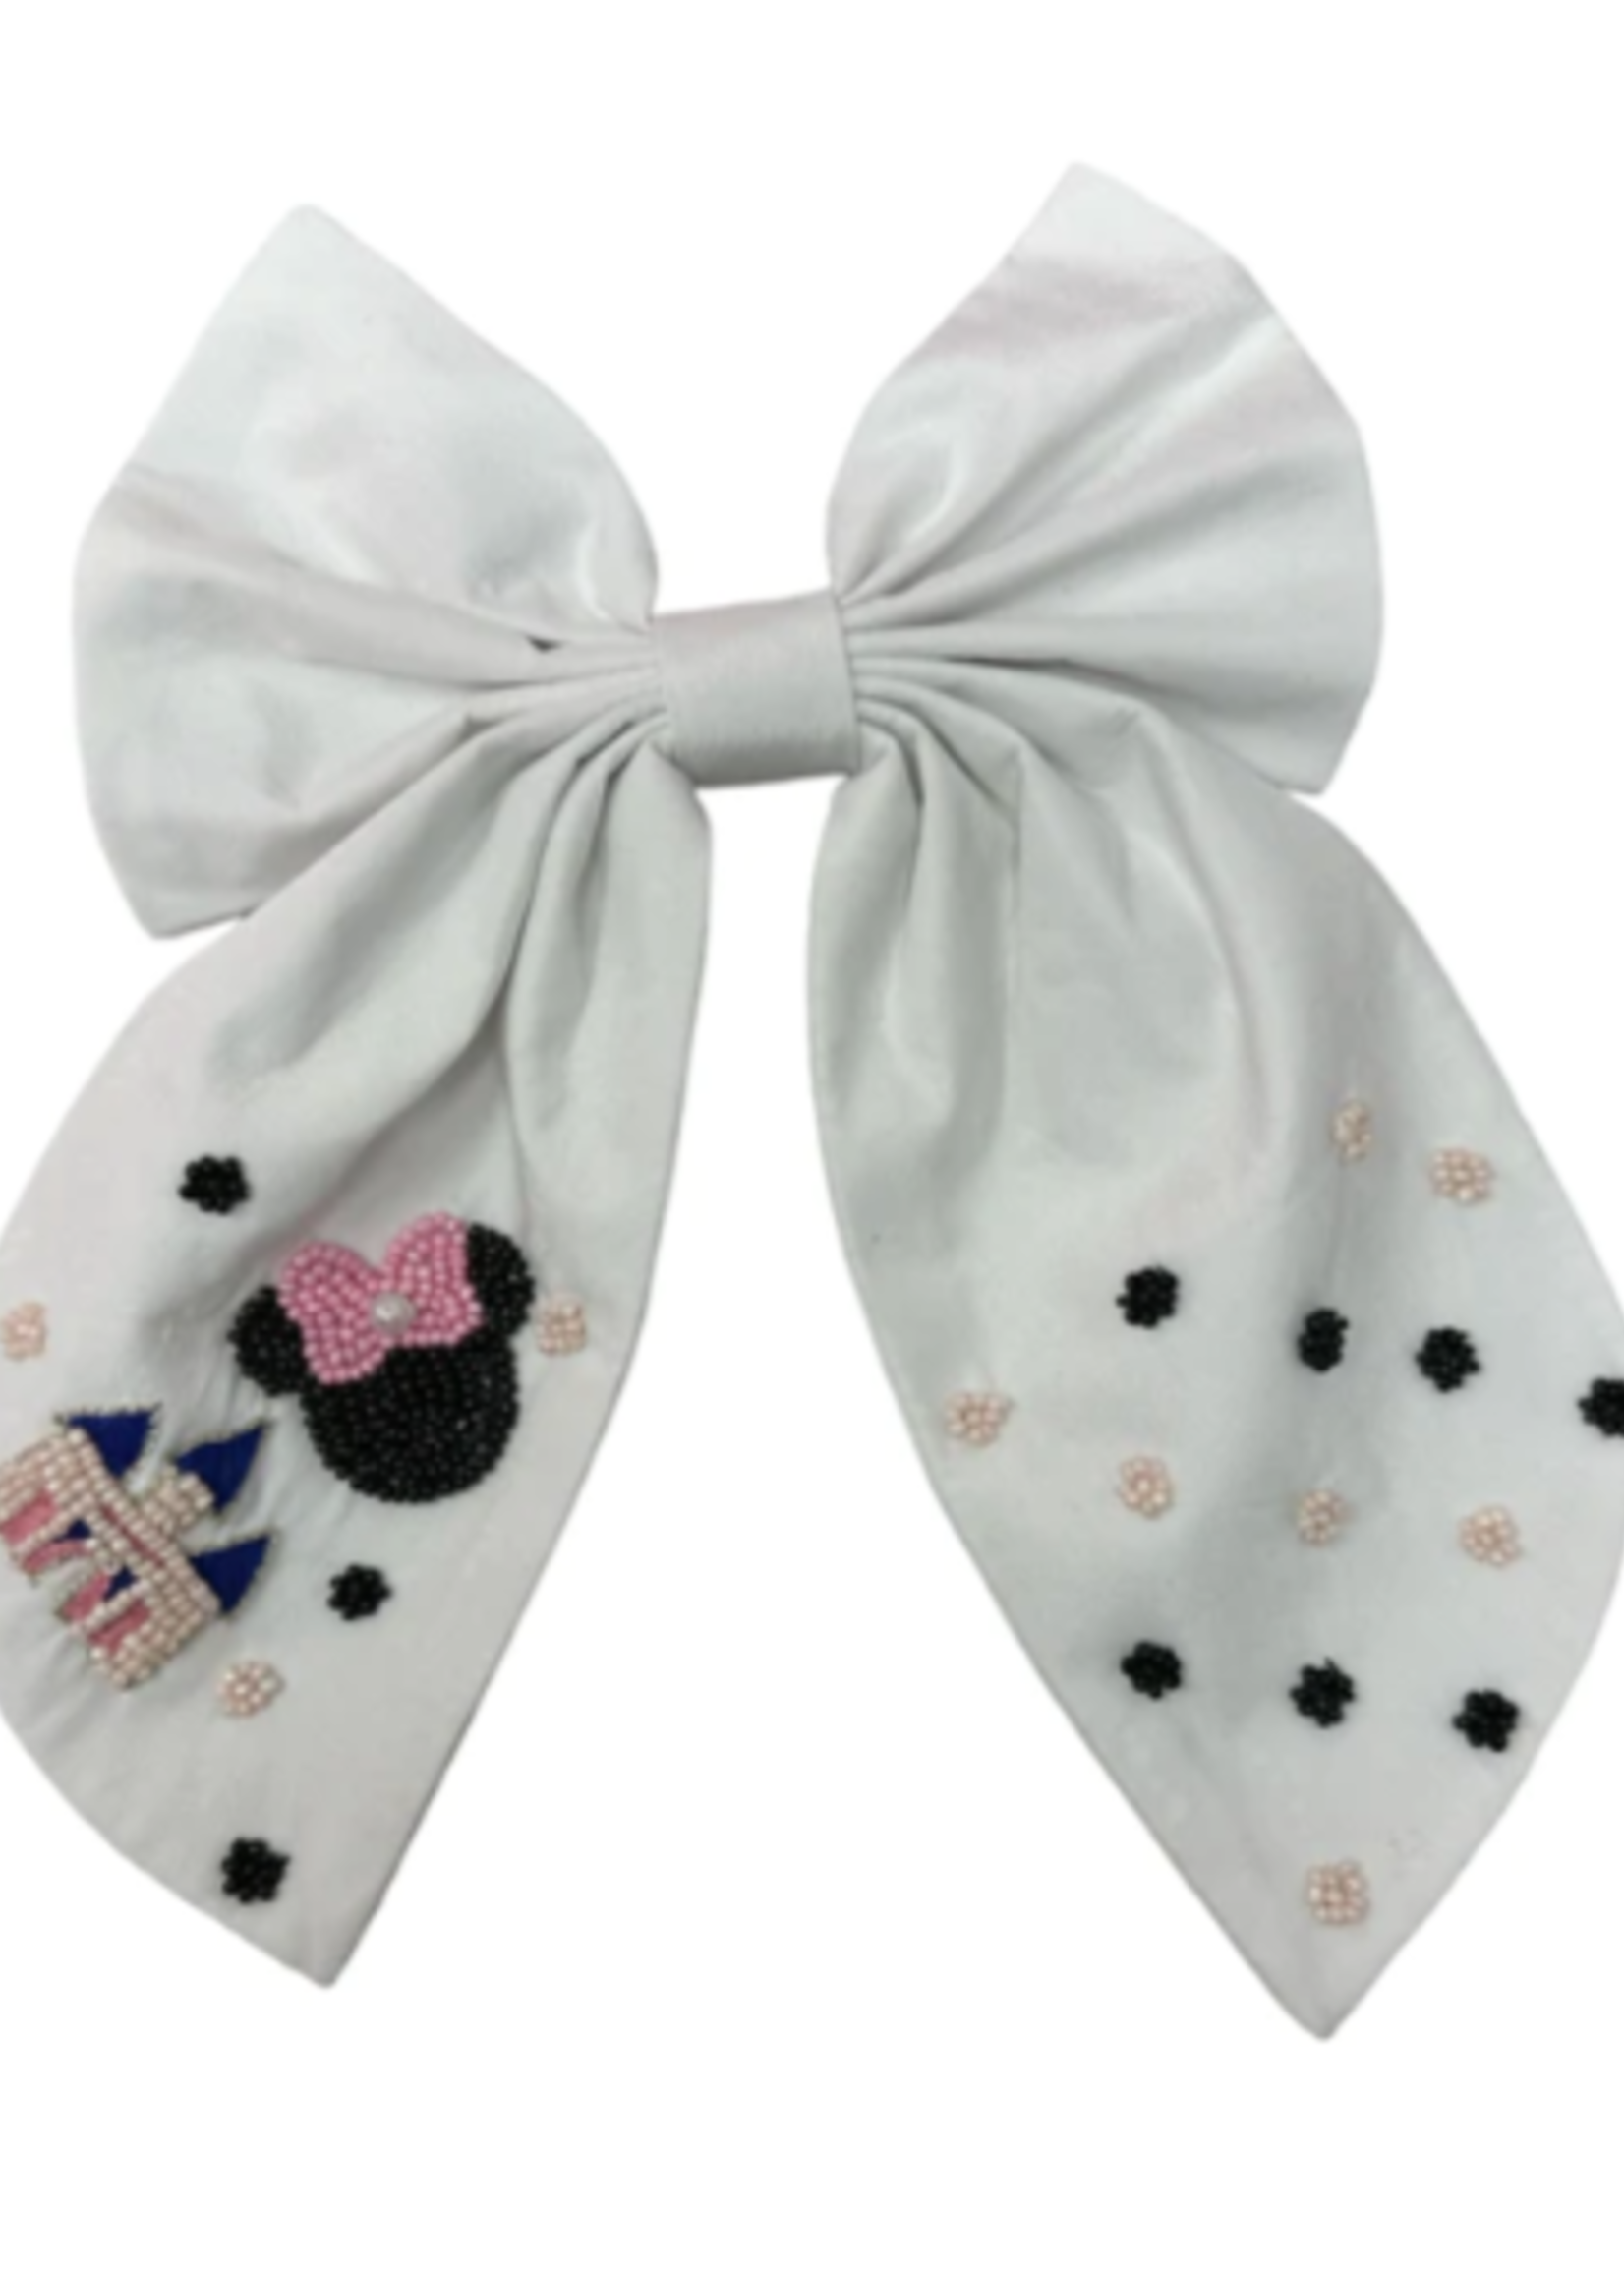 JDB Magical Mouse Bow